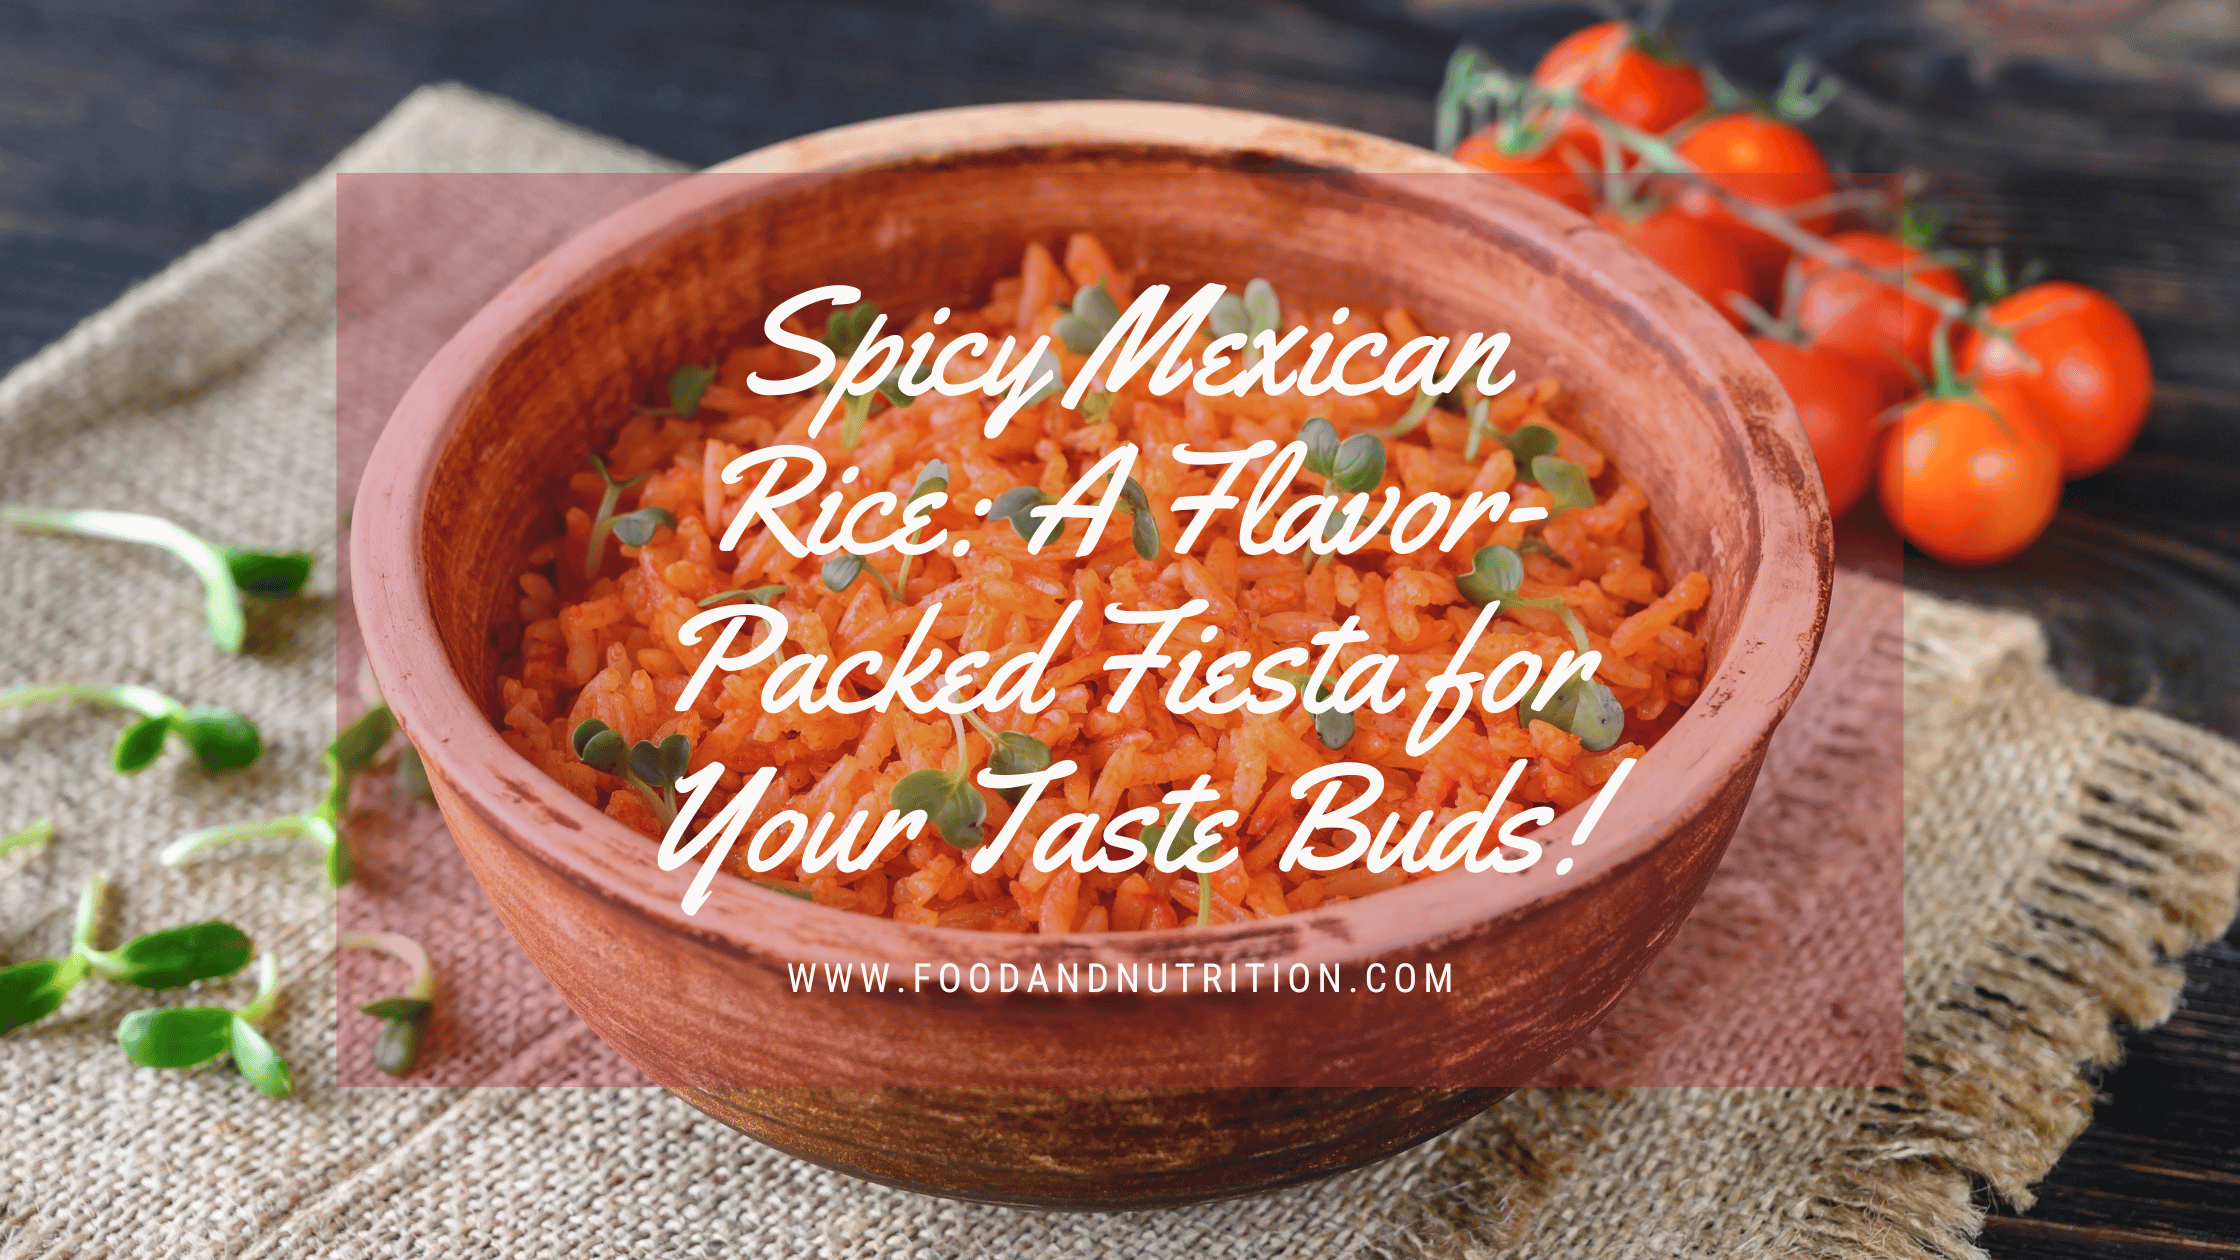 Spicy Mexican Rice: A Flavor-Packed Fiesta for Your Taste Buds!